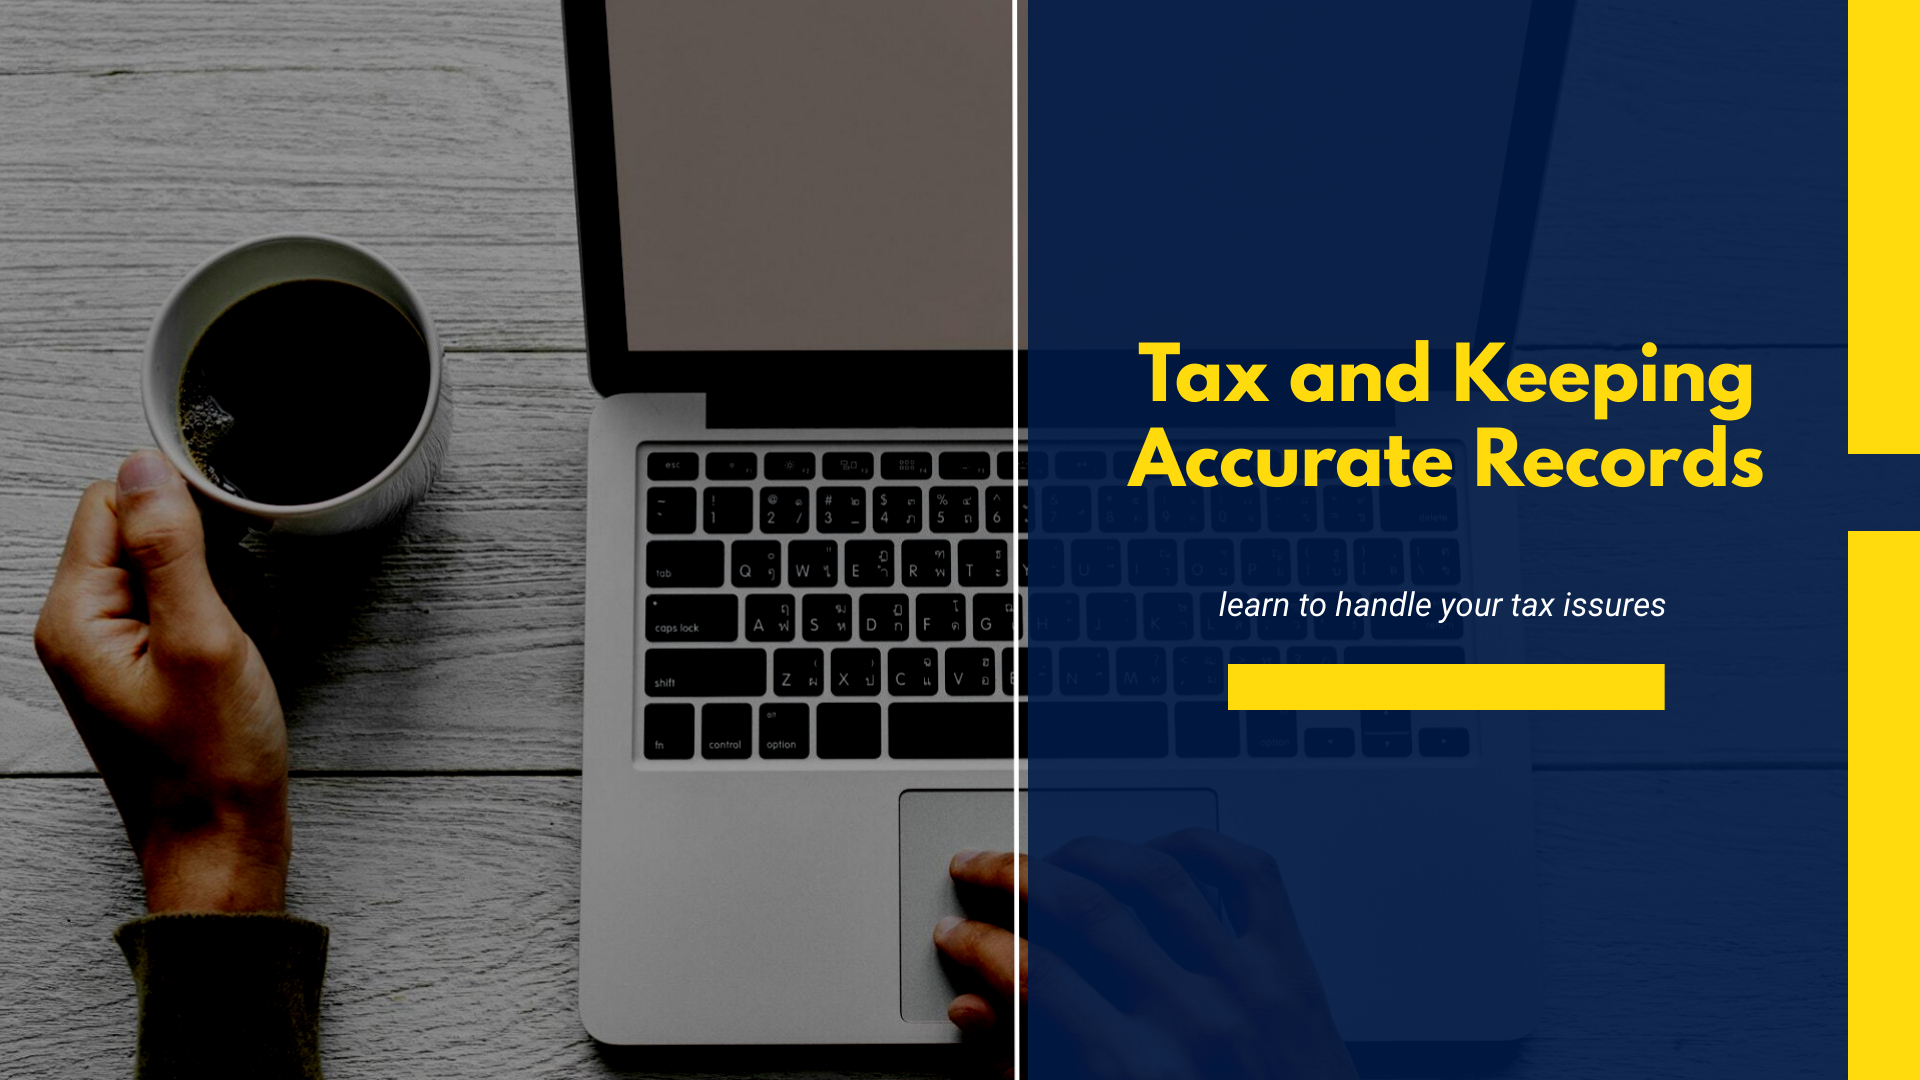 TAX AND KEEPING ACCURATE RECORDS